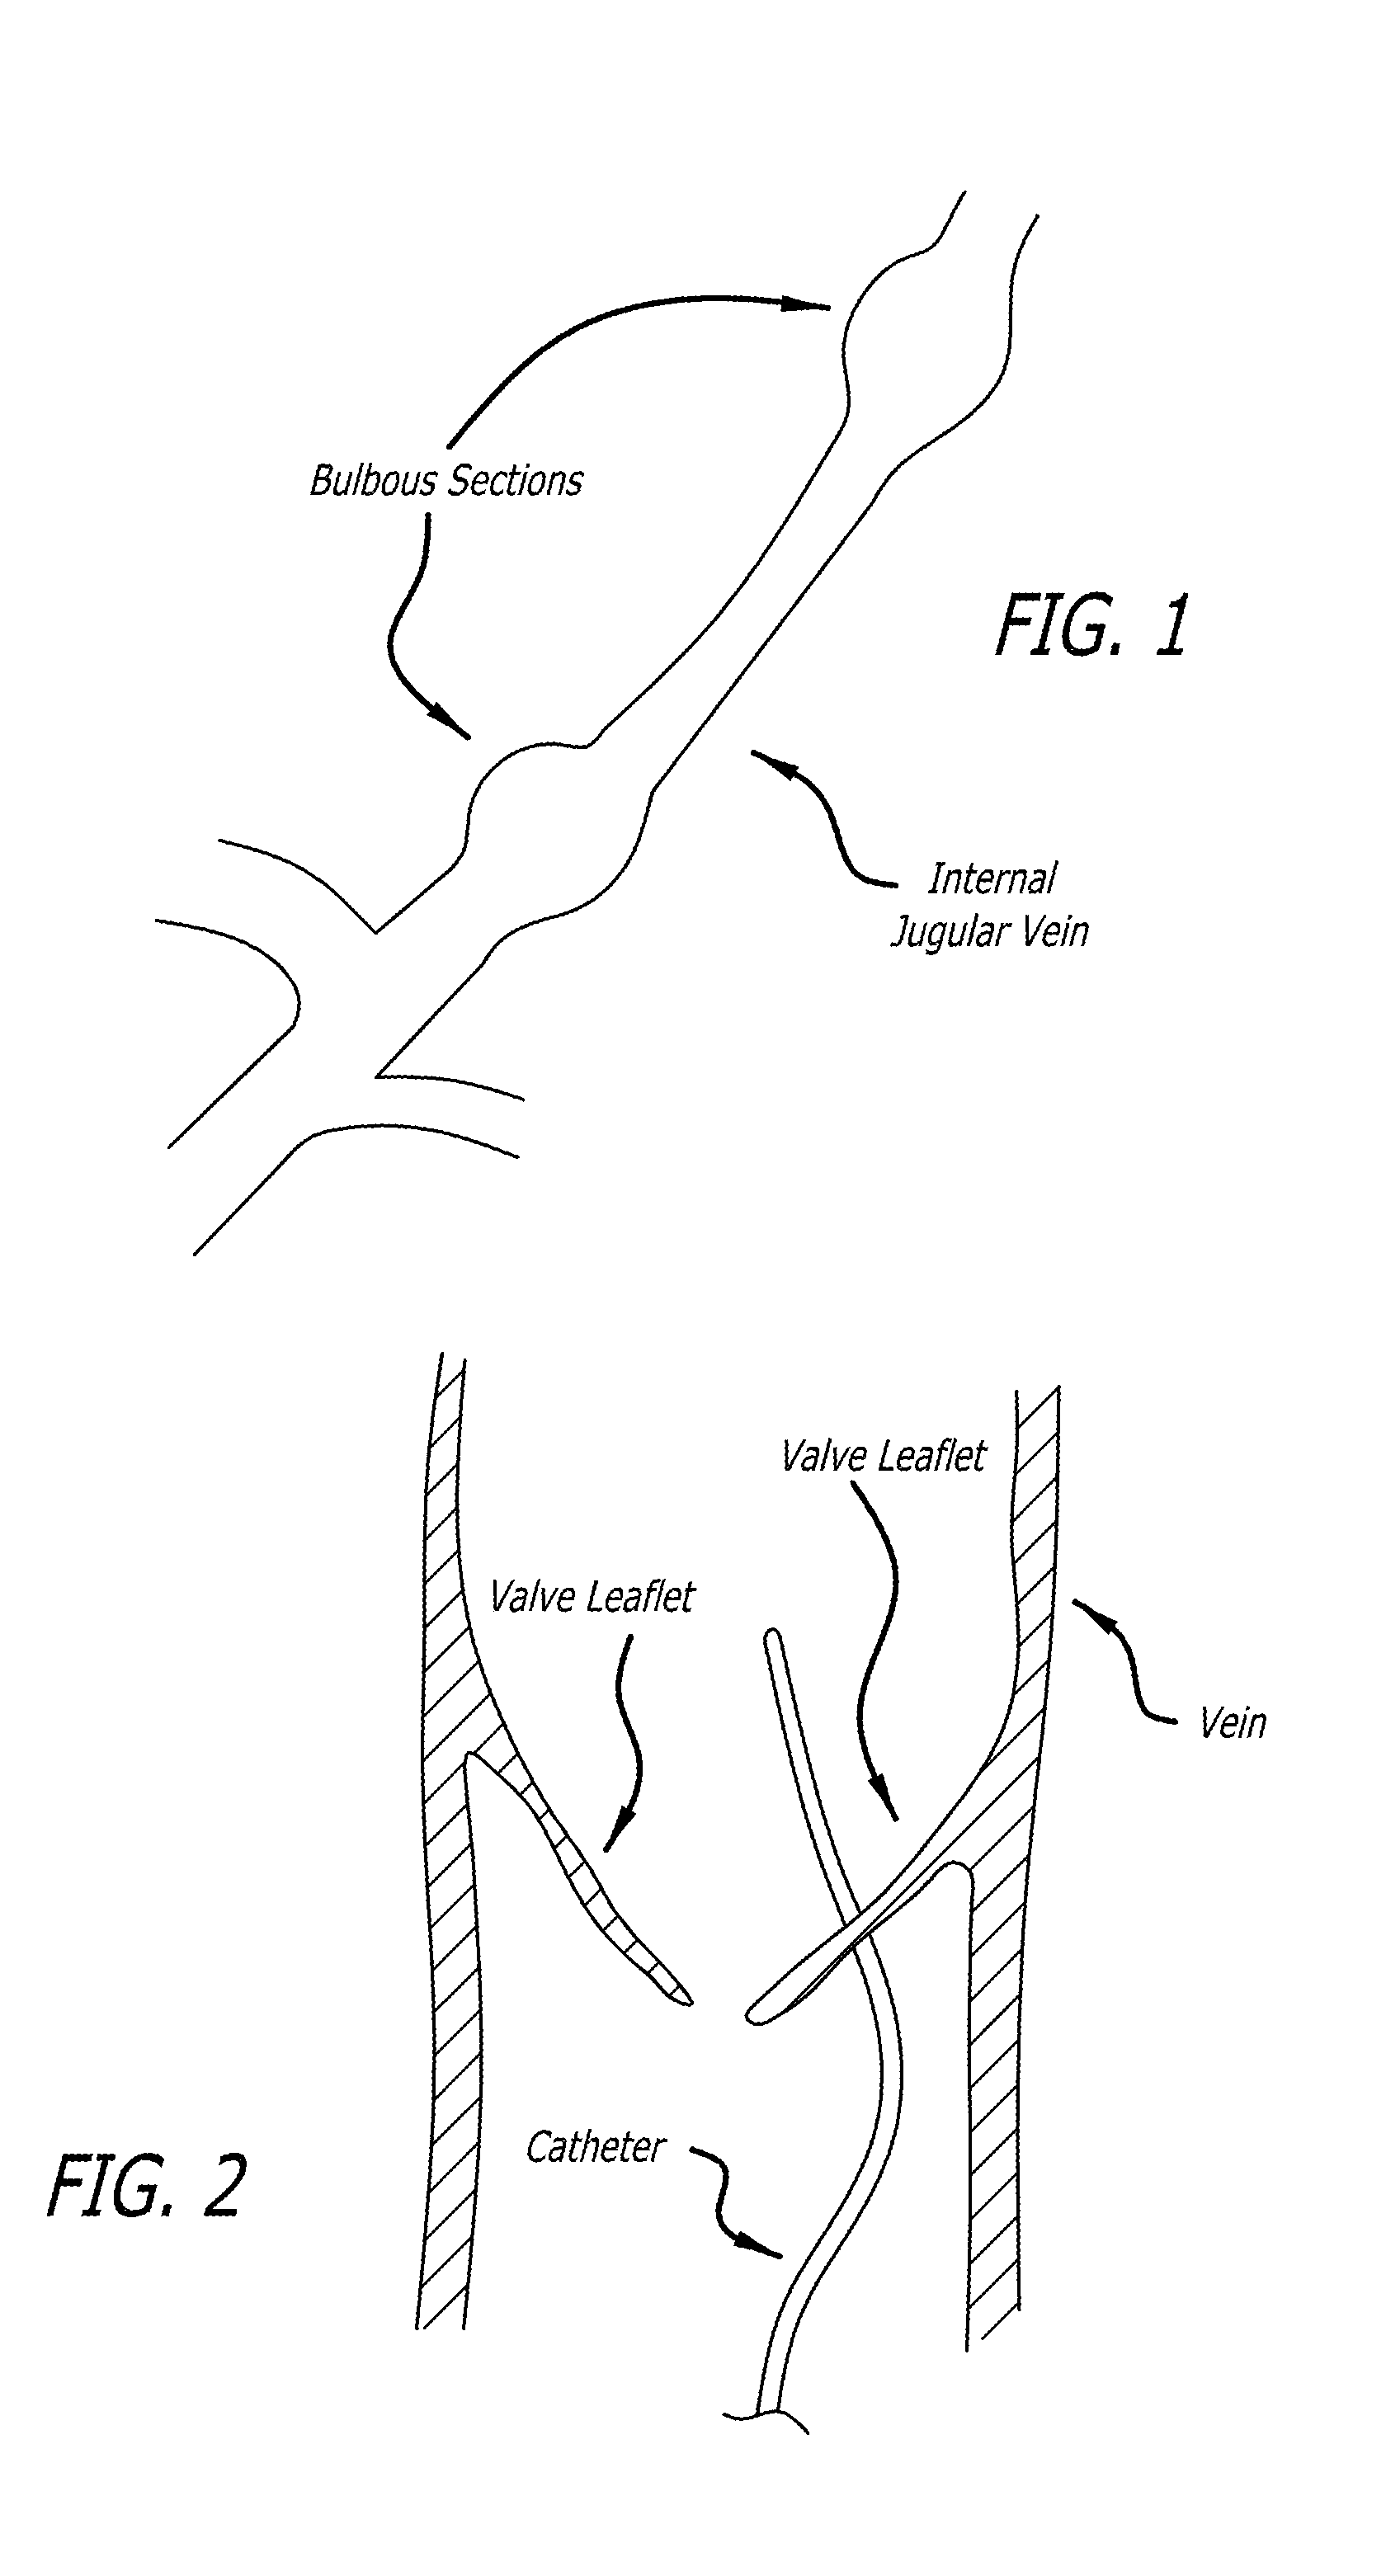 Method of delivering a medical device across a plurality of valves